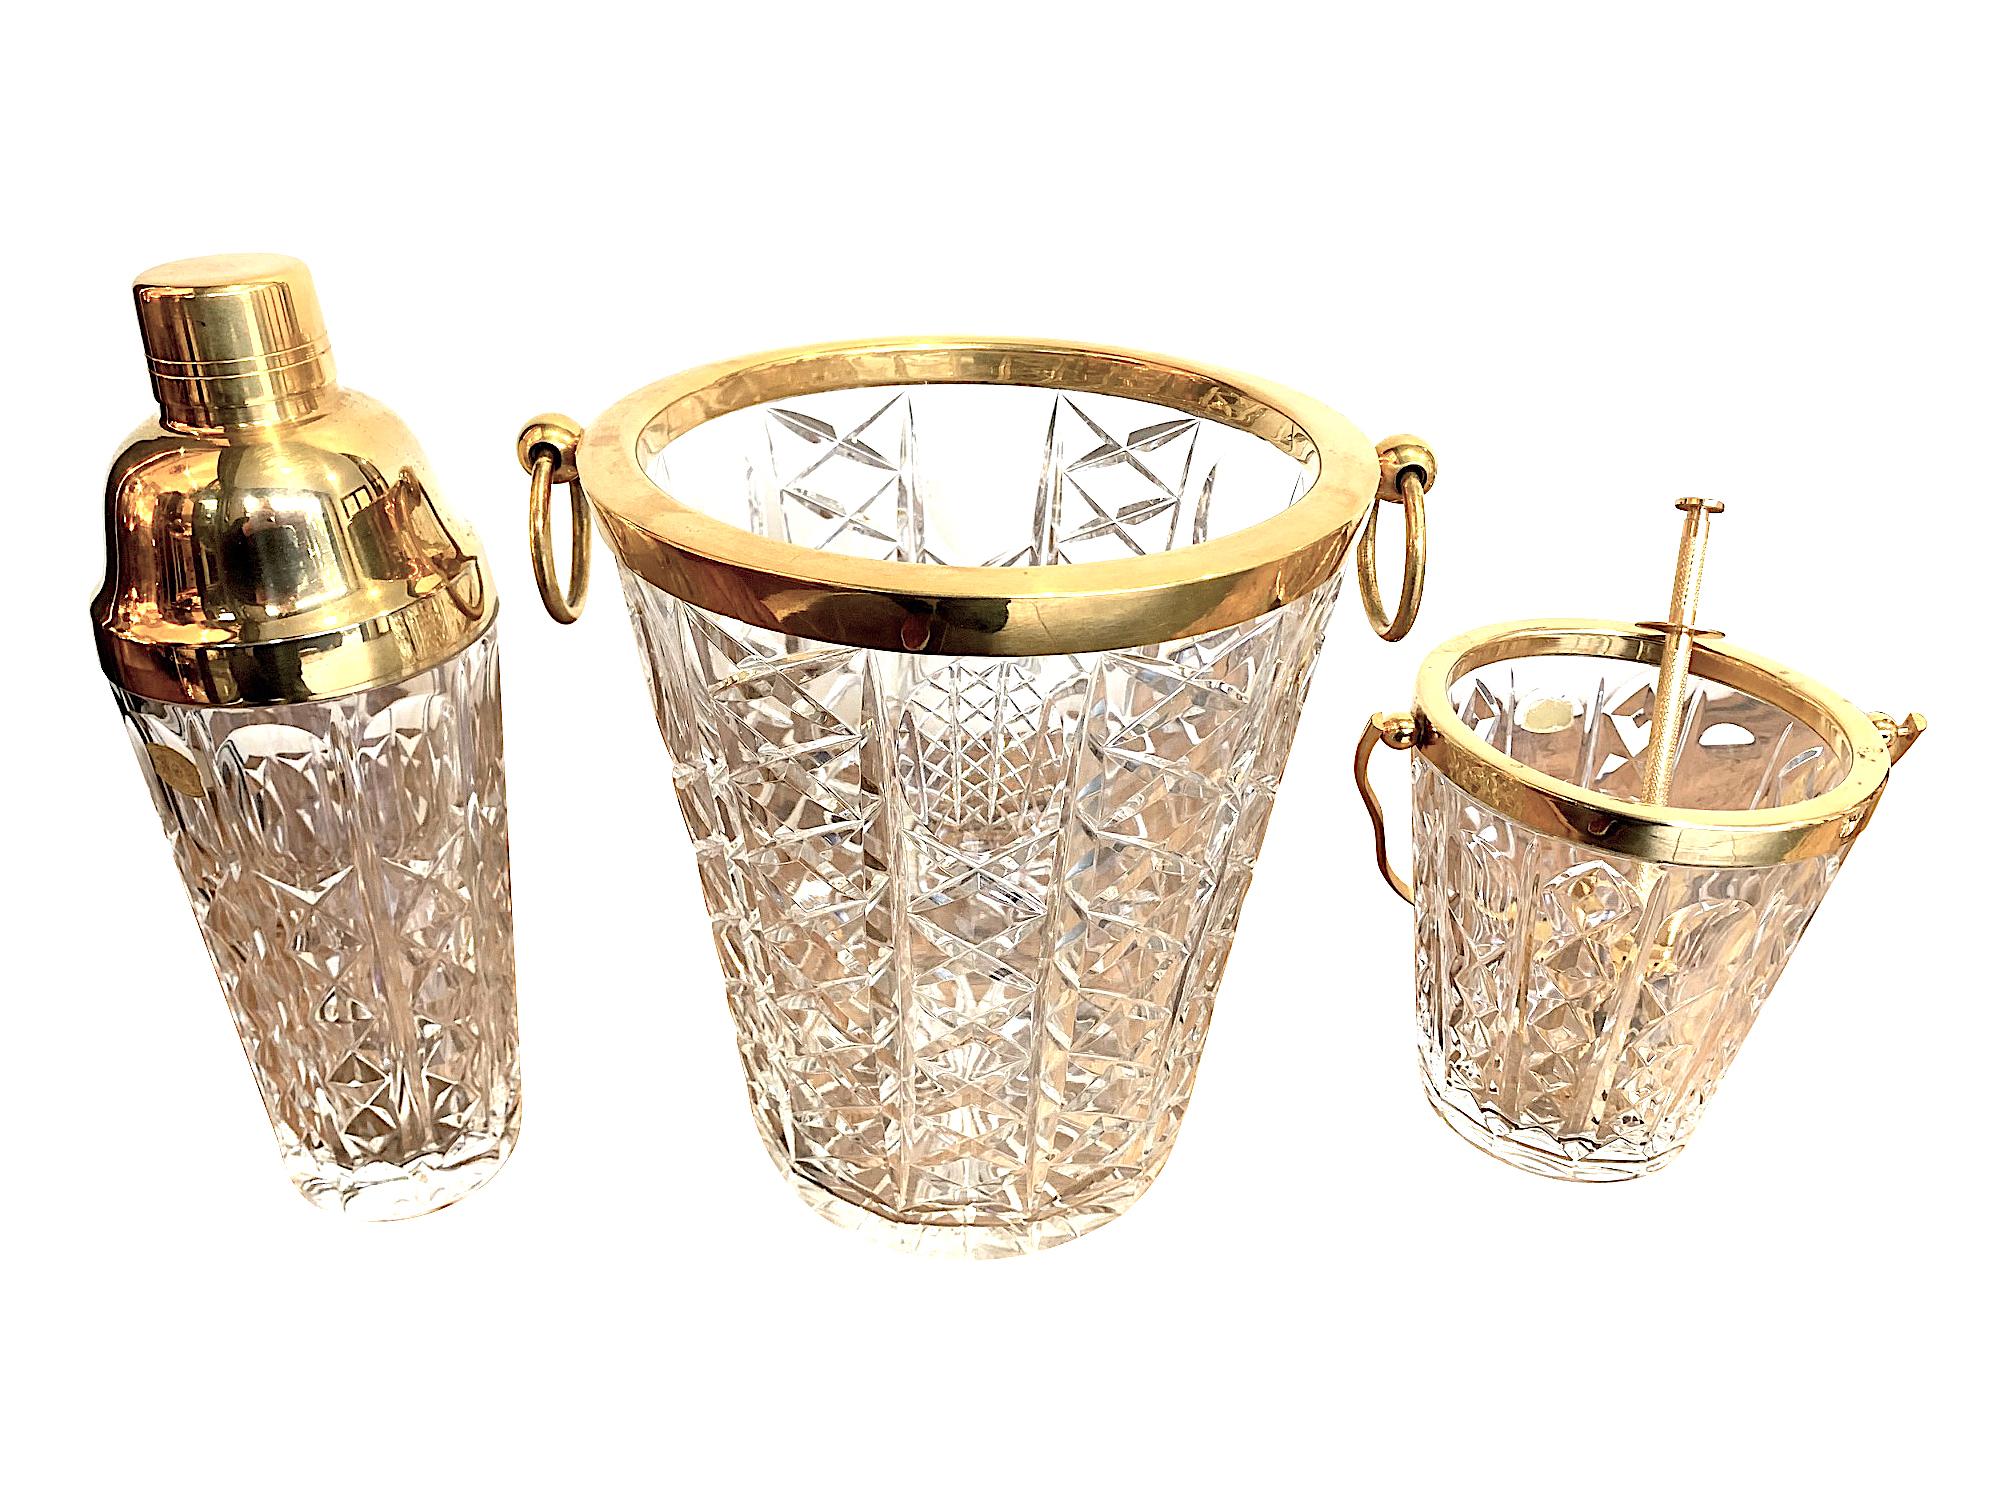 A lovely rare 1960s Val St Lambert crystal and gold-plated cocktail set with Champagne bucket, Ice bucket with ice grabbers and cocktail Shaker, all in good condition. Measurement listed is for the Champagne bucket.